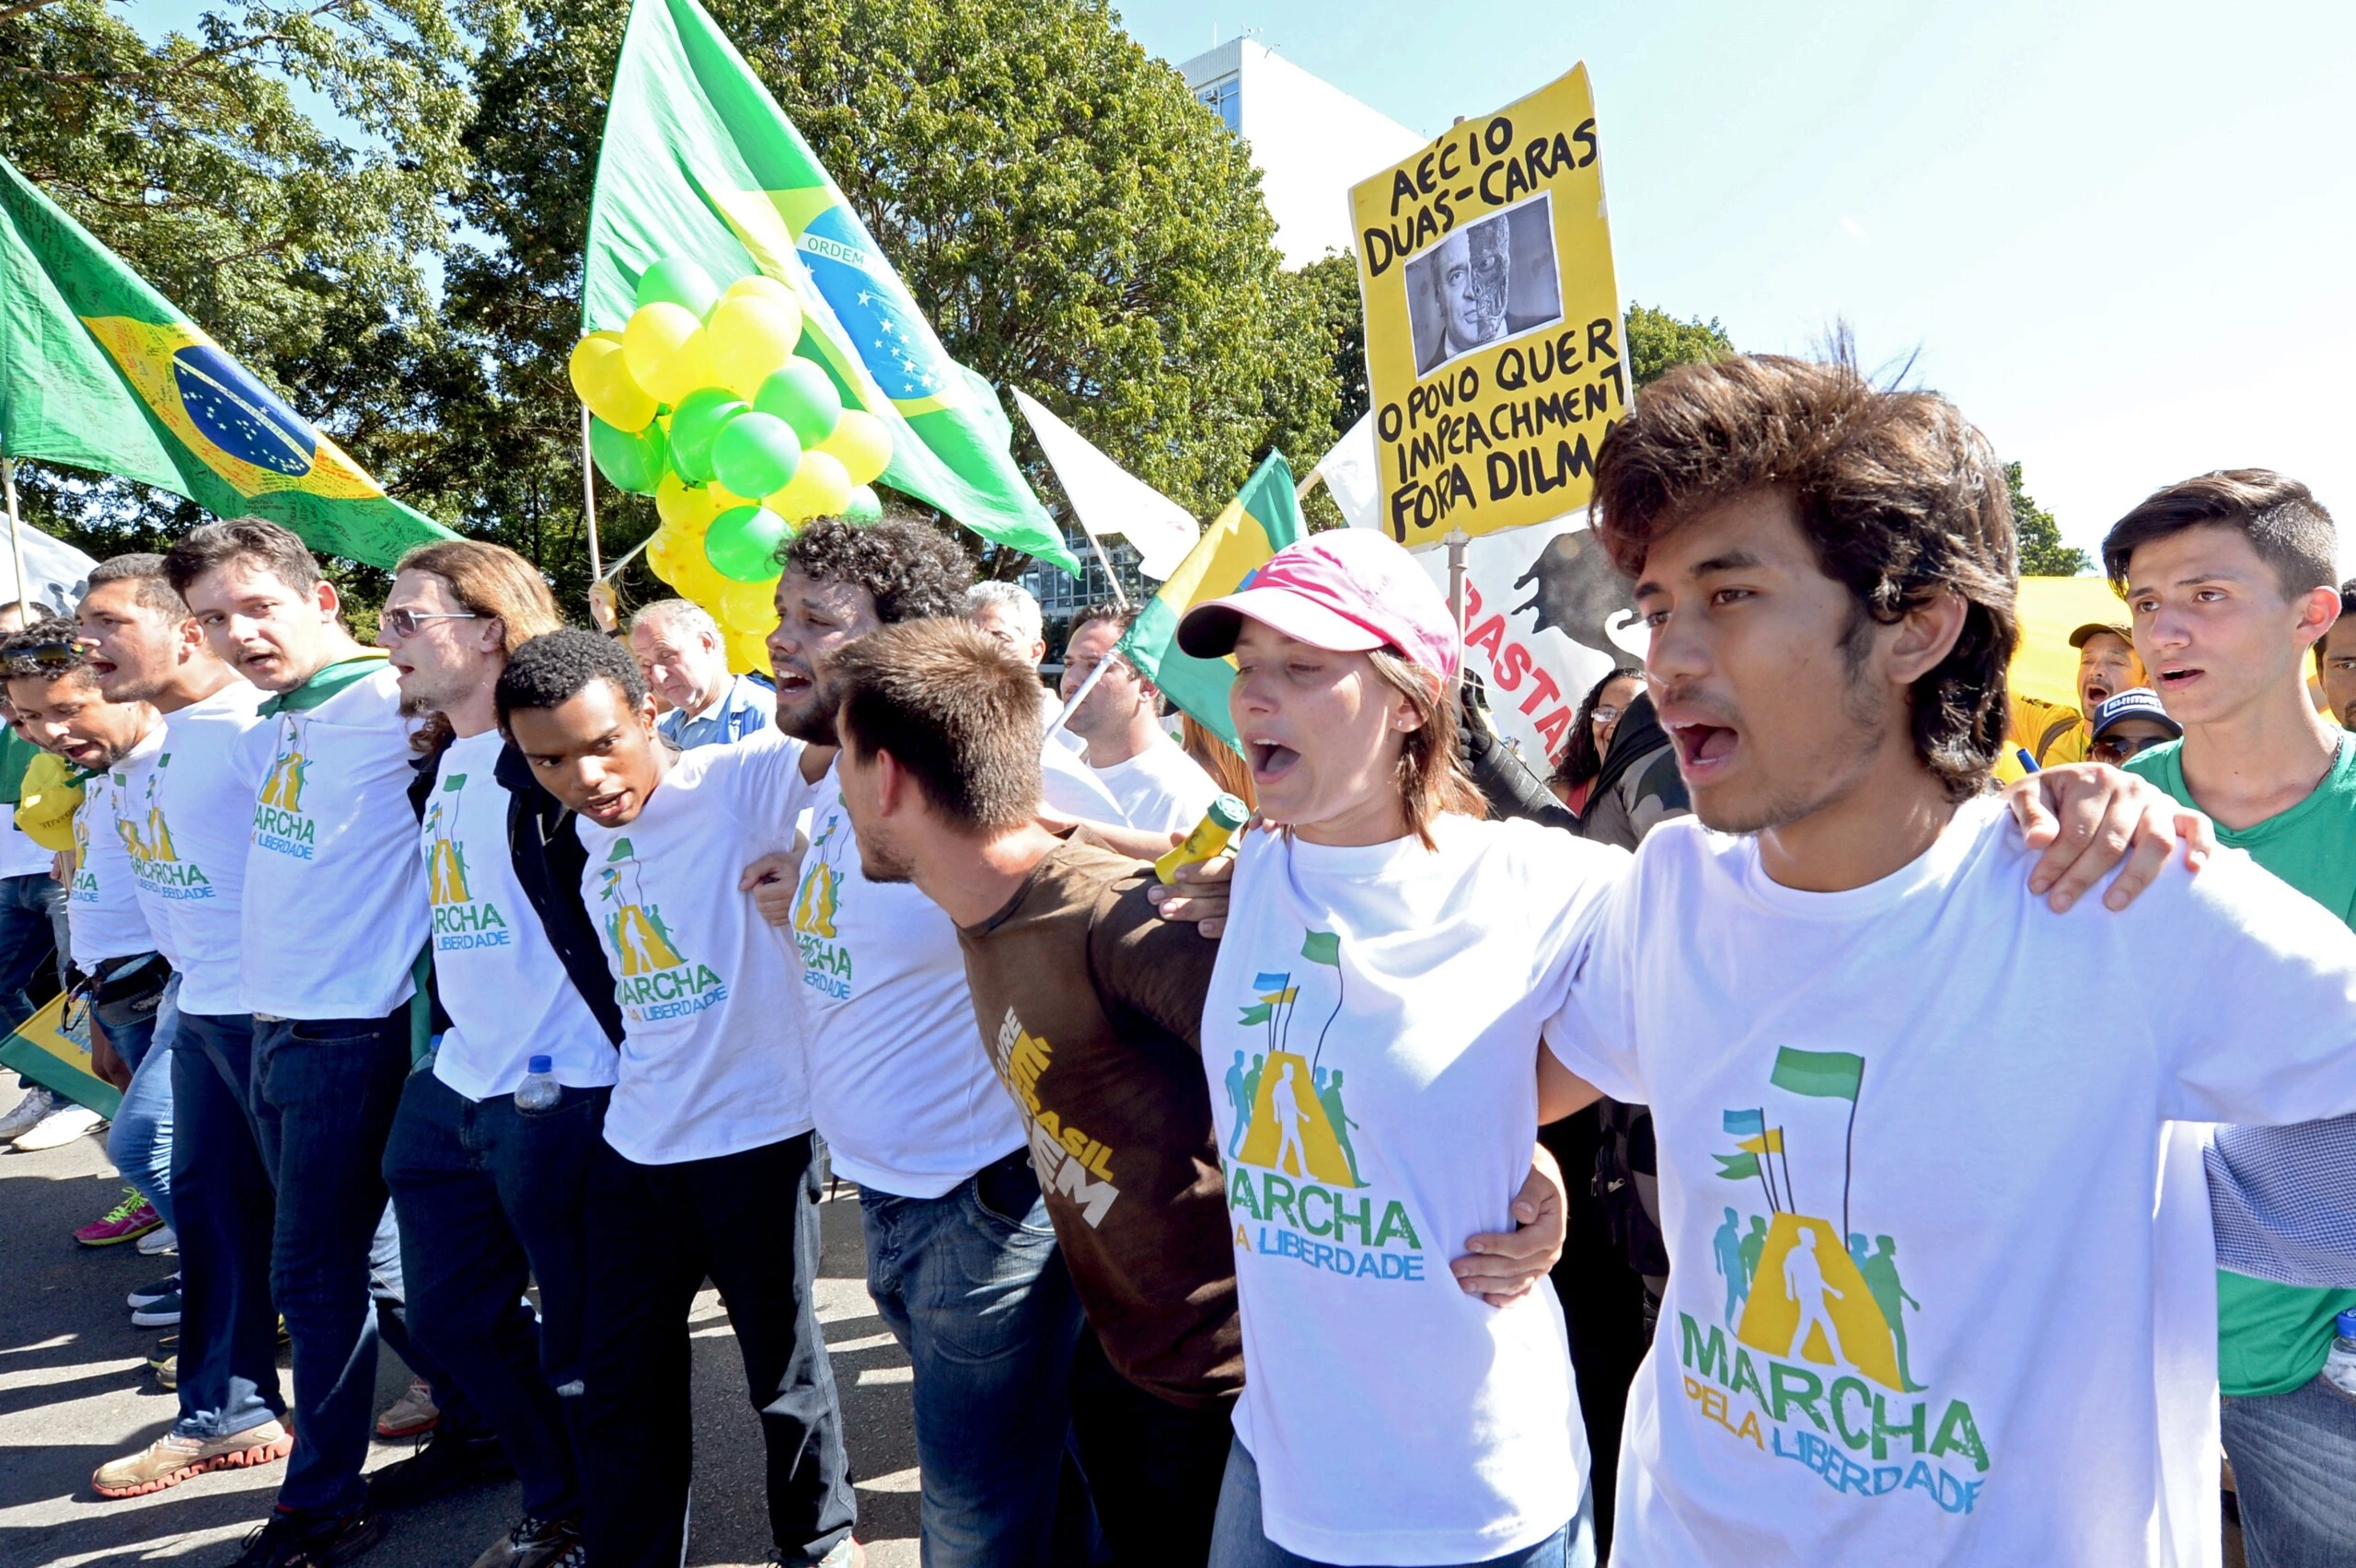 Kim Kataguiri (R), leader of the Free Brazil Movement (MBL), takes part in the March for Freedom in demand of President Dilma Rousseff's impeachment in Brasilia, Brazil on May 27, 2015. Kataguiri, a 19-year-old college drop out, is the face of MBL, a growing force which seeks to harness some of the energy of the 2013 protest movement which brought more than a million onto the streets. AFP PHOTO/EVARISTO SA        (Photo credit should read EVARISTO SA/AFP via Getty Images)